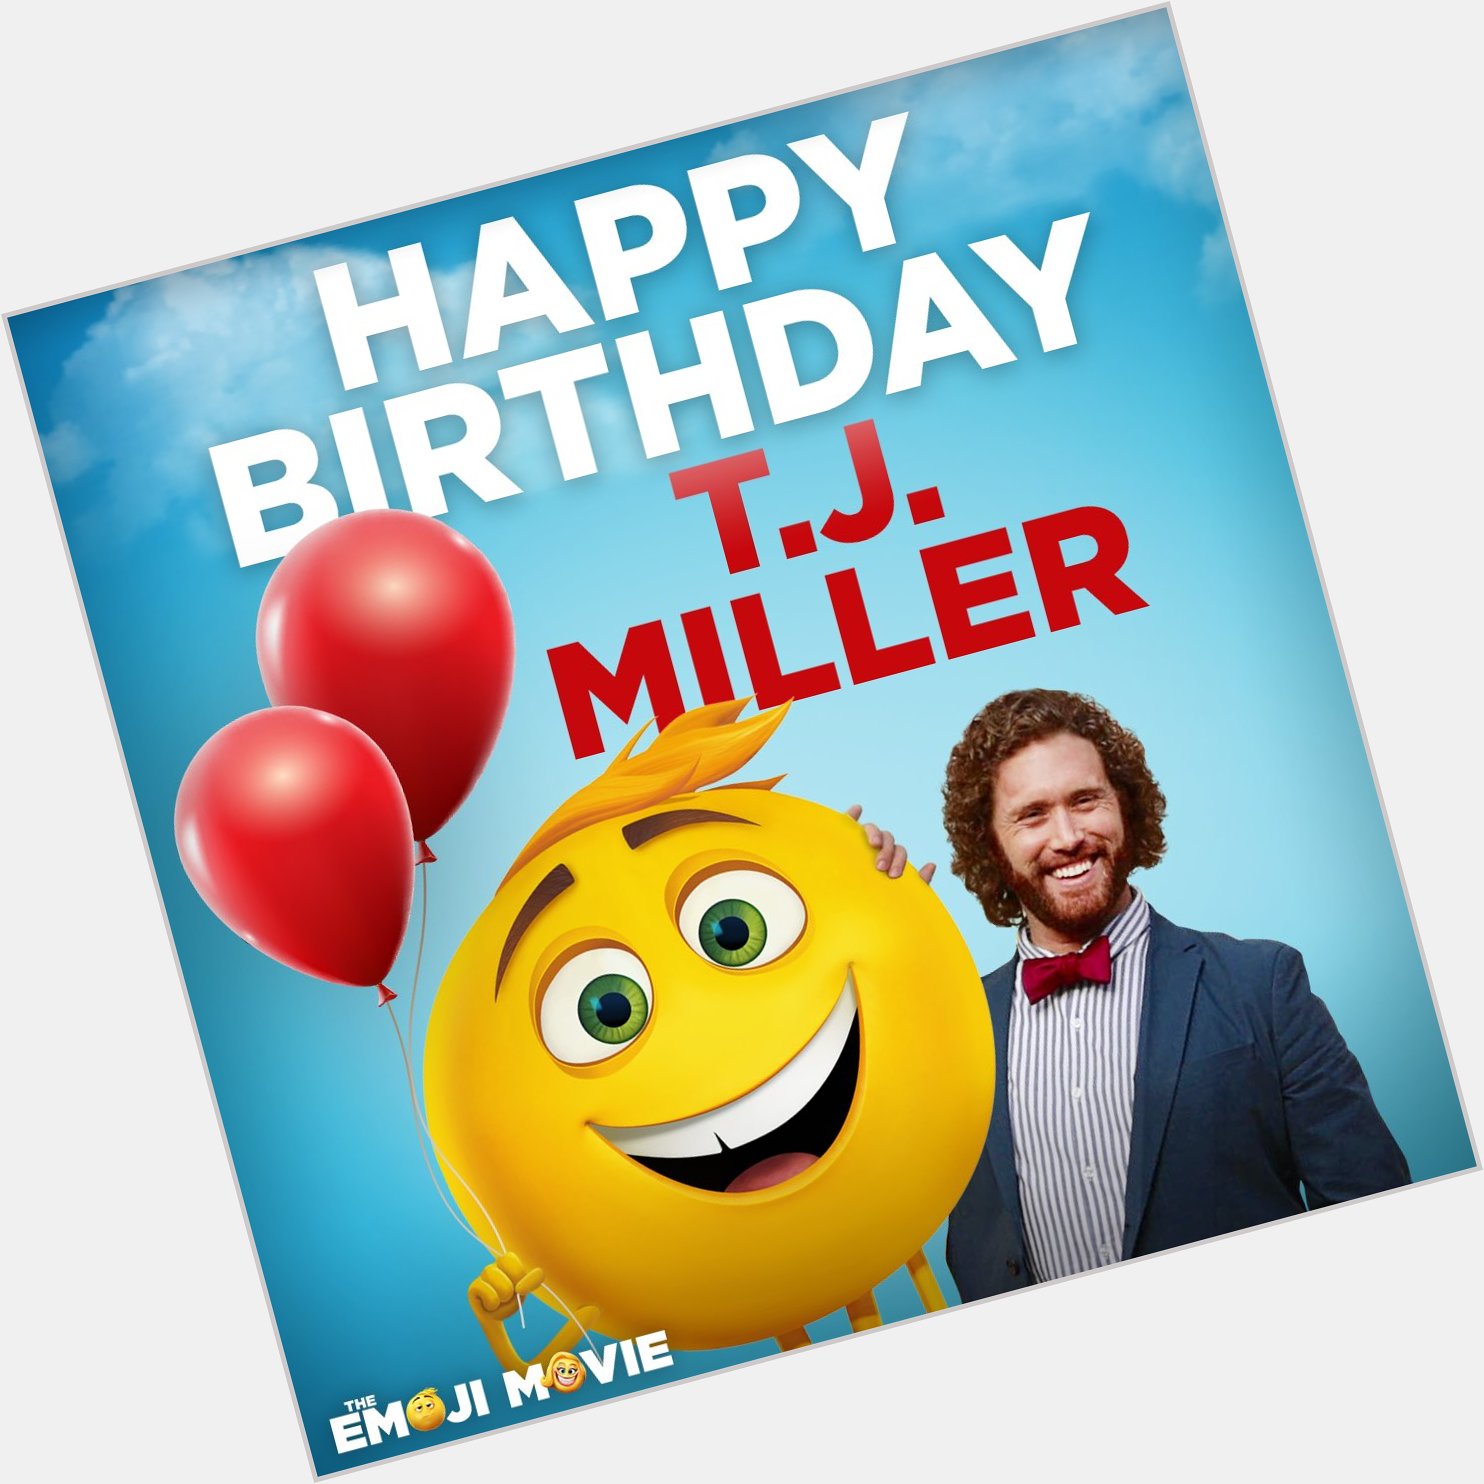 The similarity is uncanny. Happy Birthday to Gene himself, T.J. Miller!  